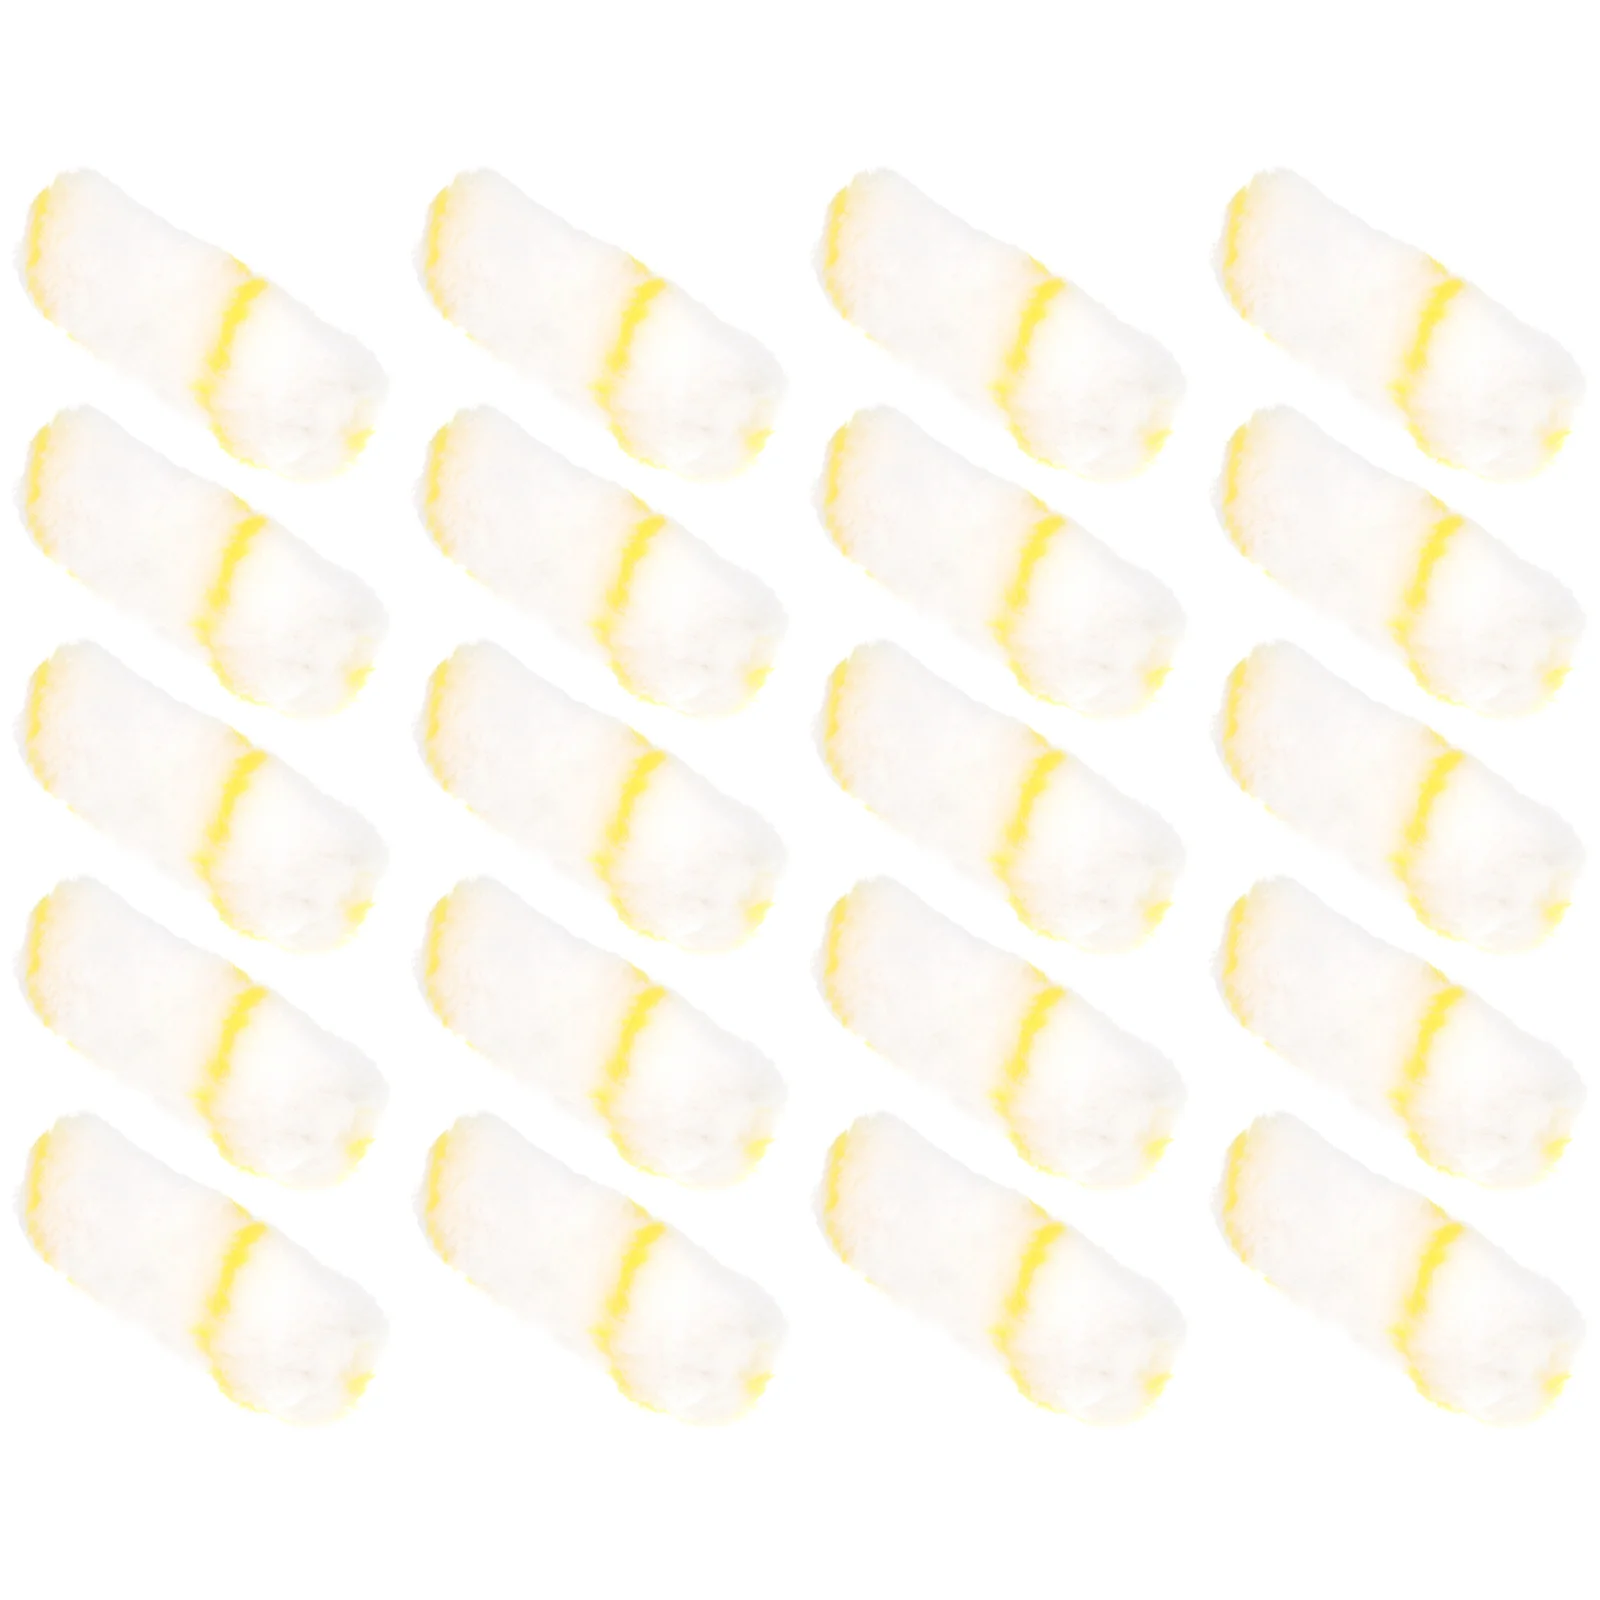 

20 PCS Roller Brush Replacement Cover Painting Supplies Wall Kit Mohair Mini Frames Covers Refill Rollers Set